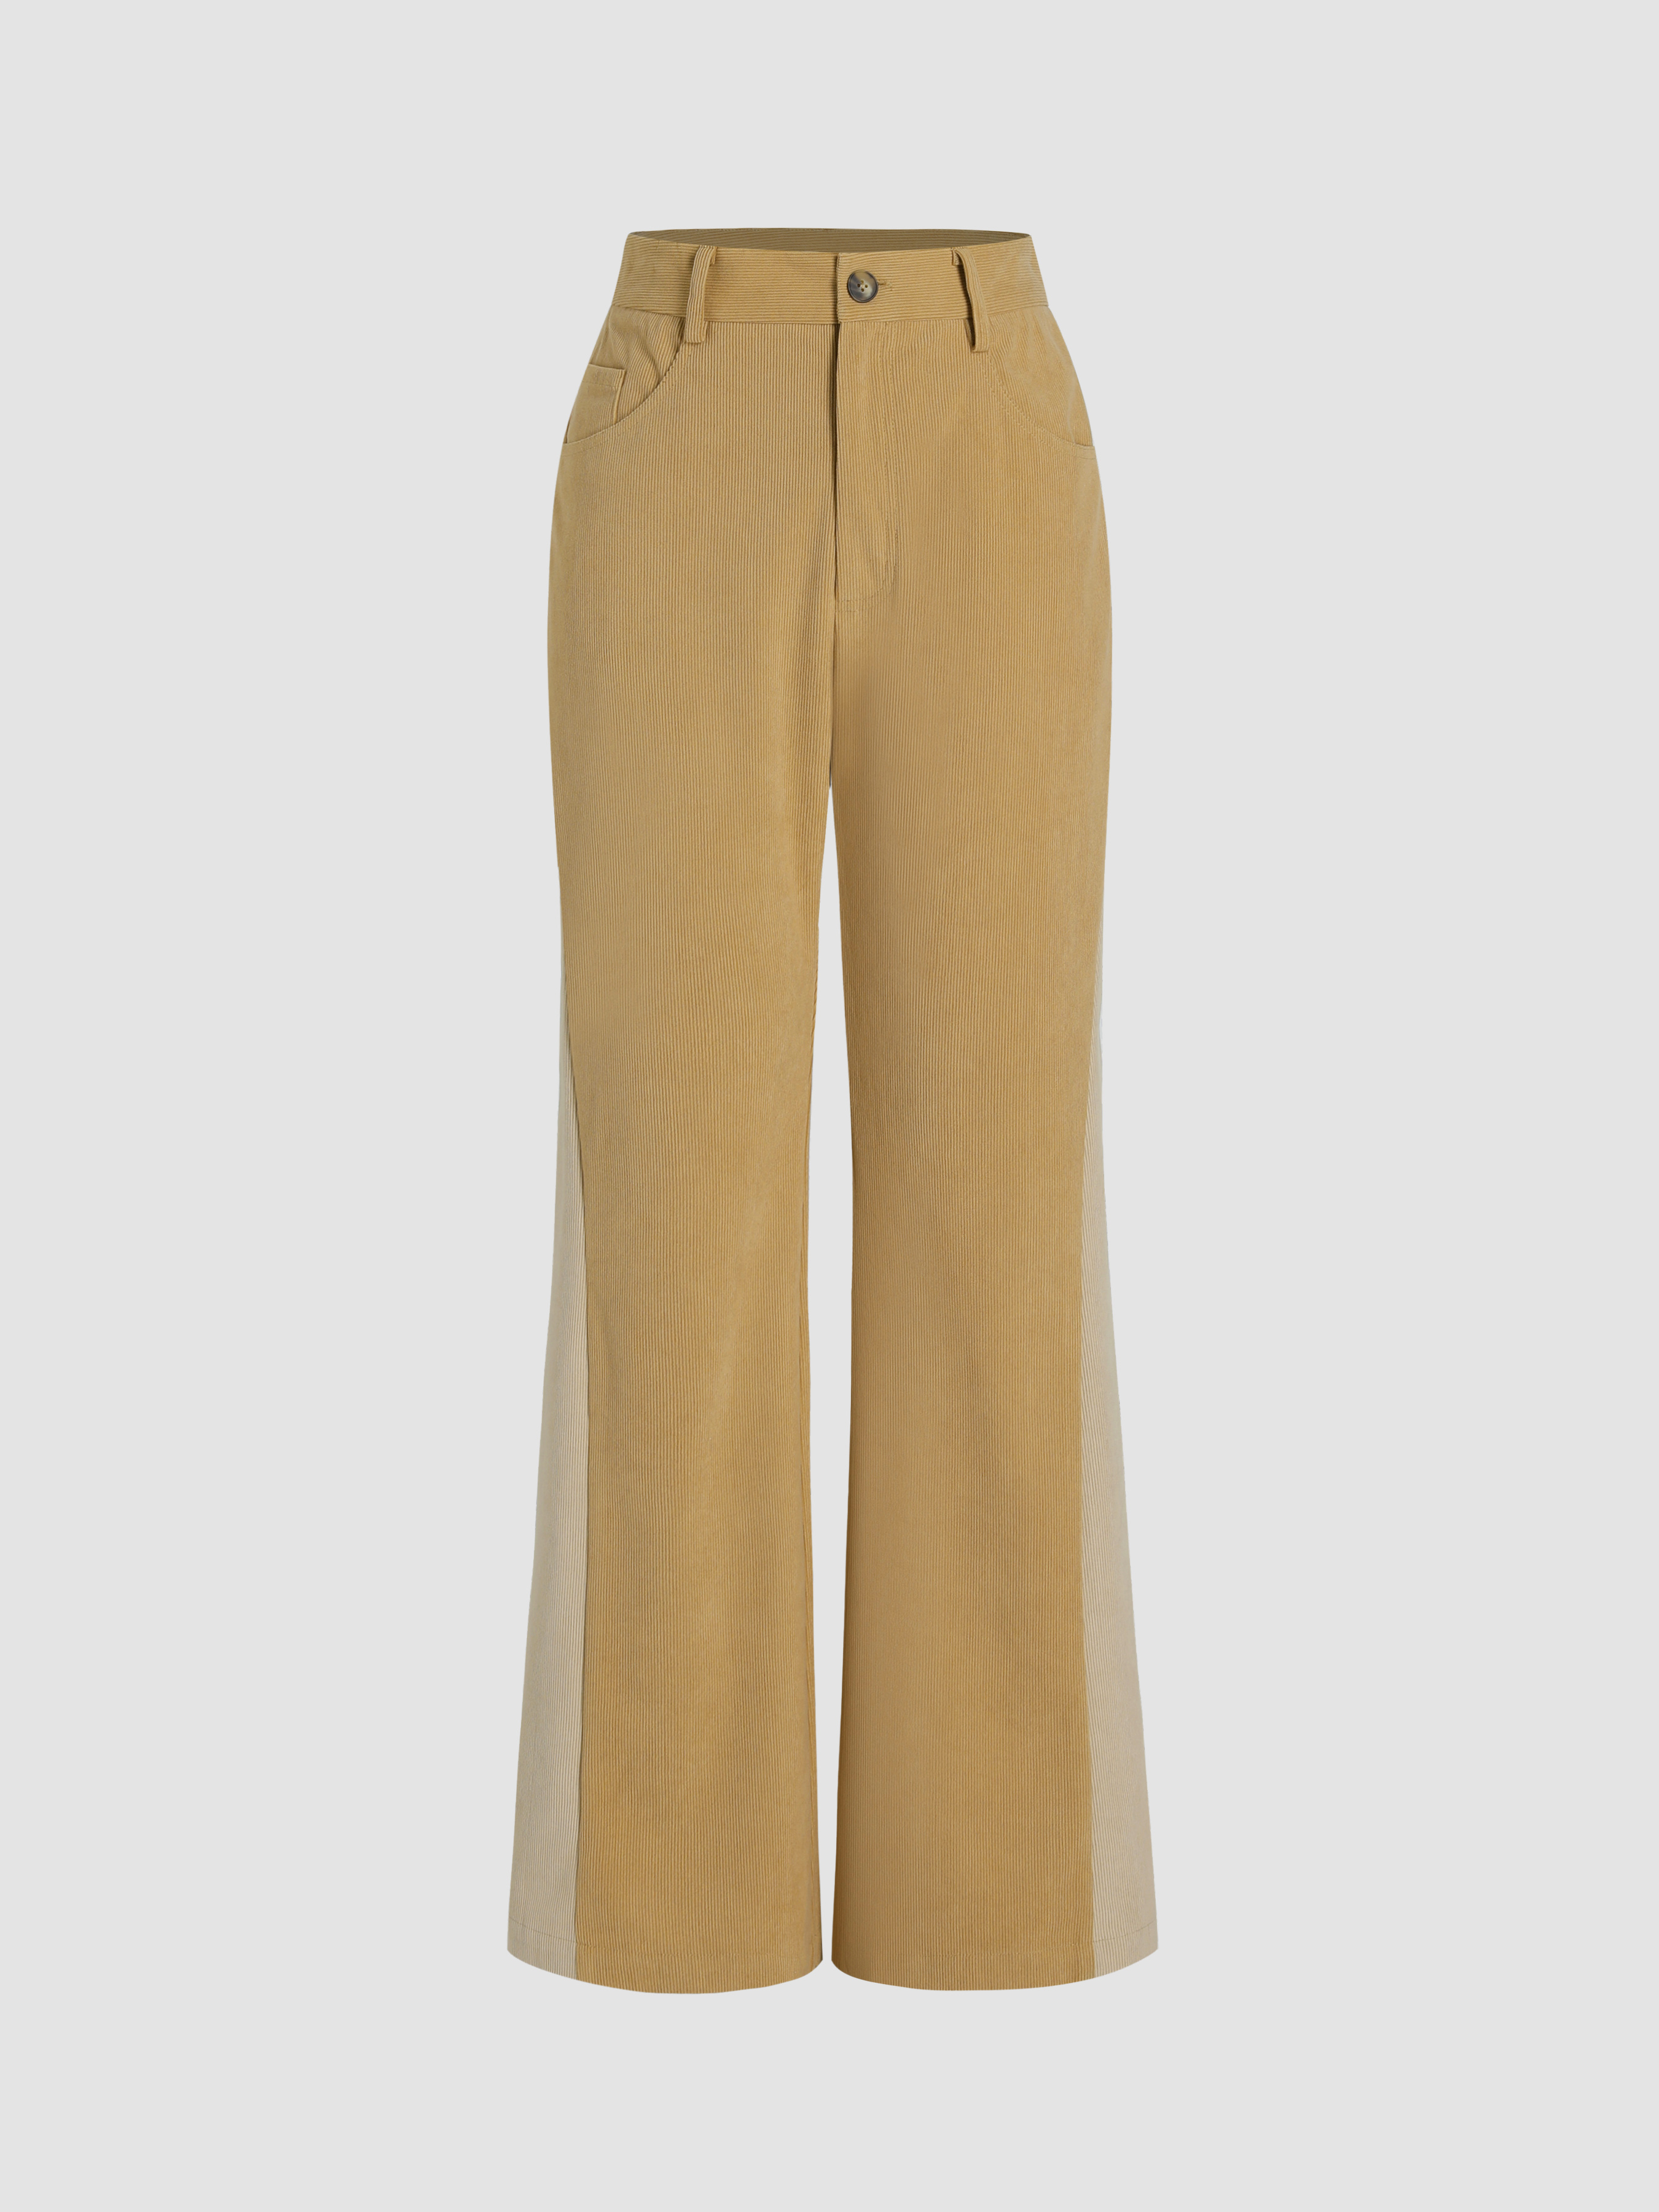 Corduroy High Waist Flared Trousers - Cider